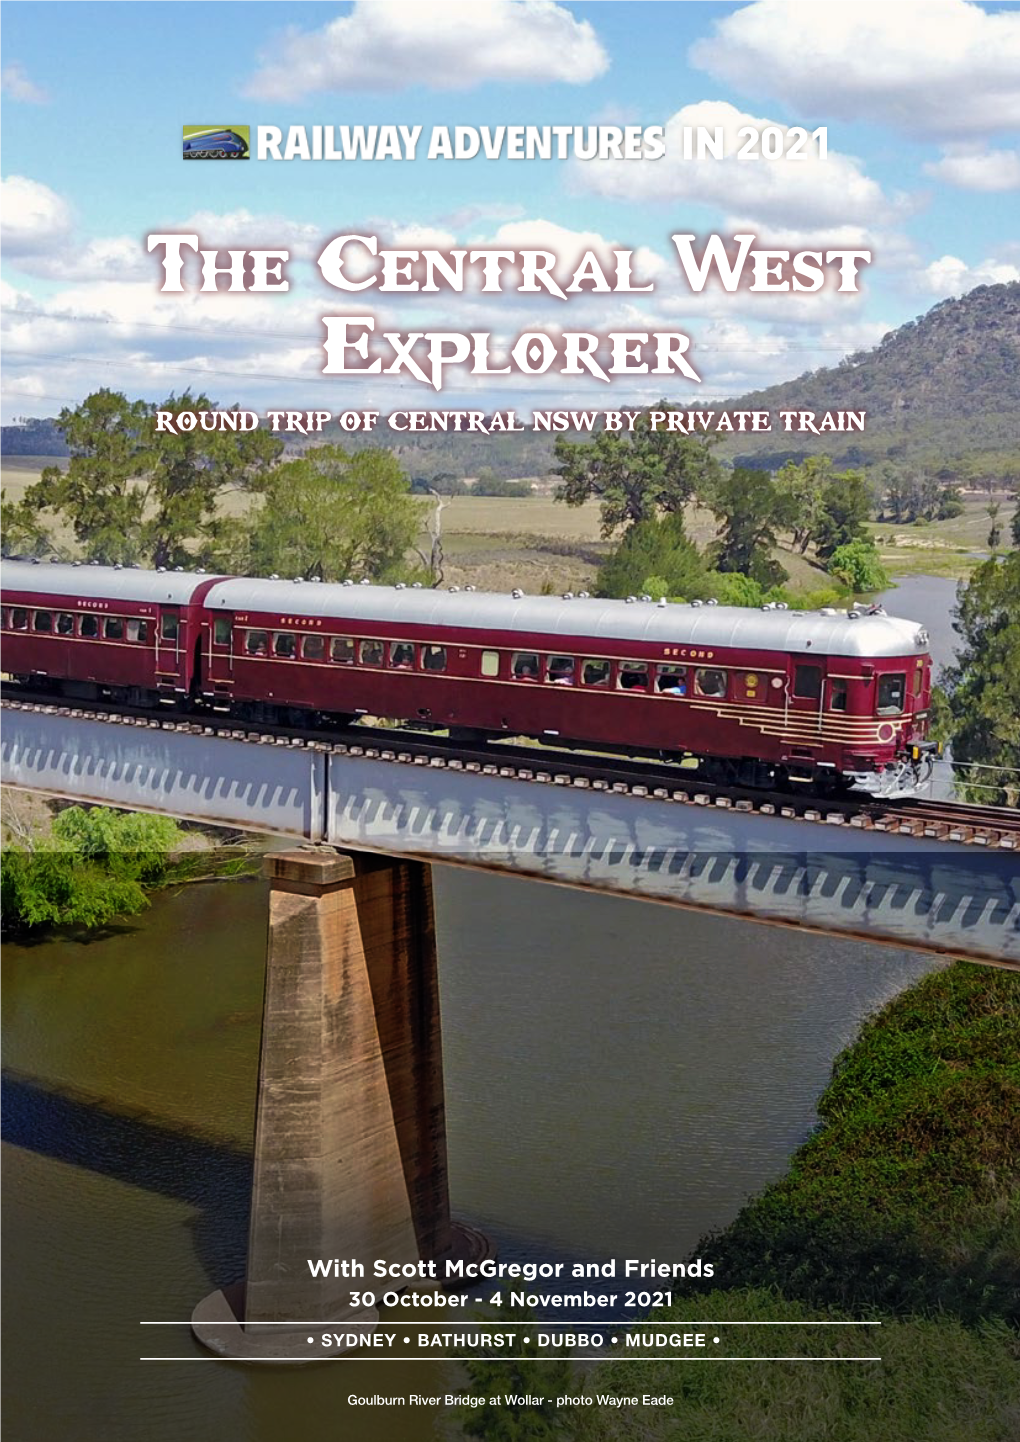 The Central West Explorer ROUND TRIP of CENTRAL NSW by PRIVATE TRAIN